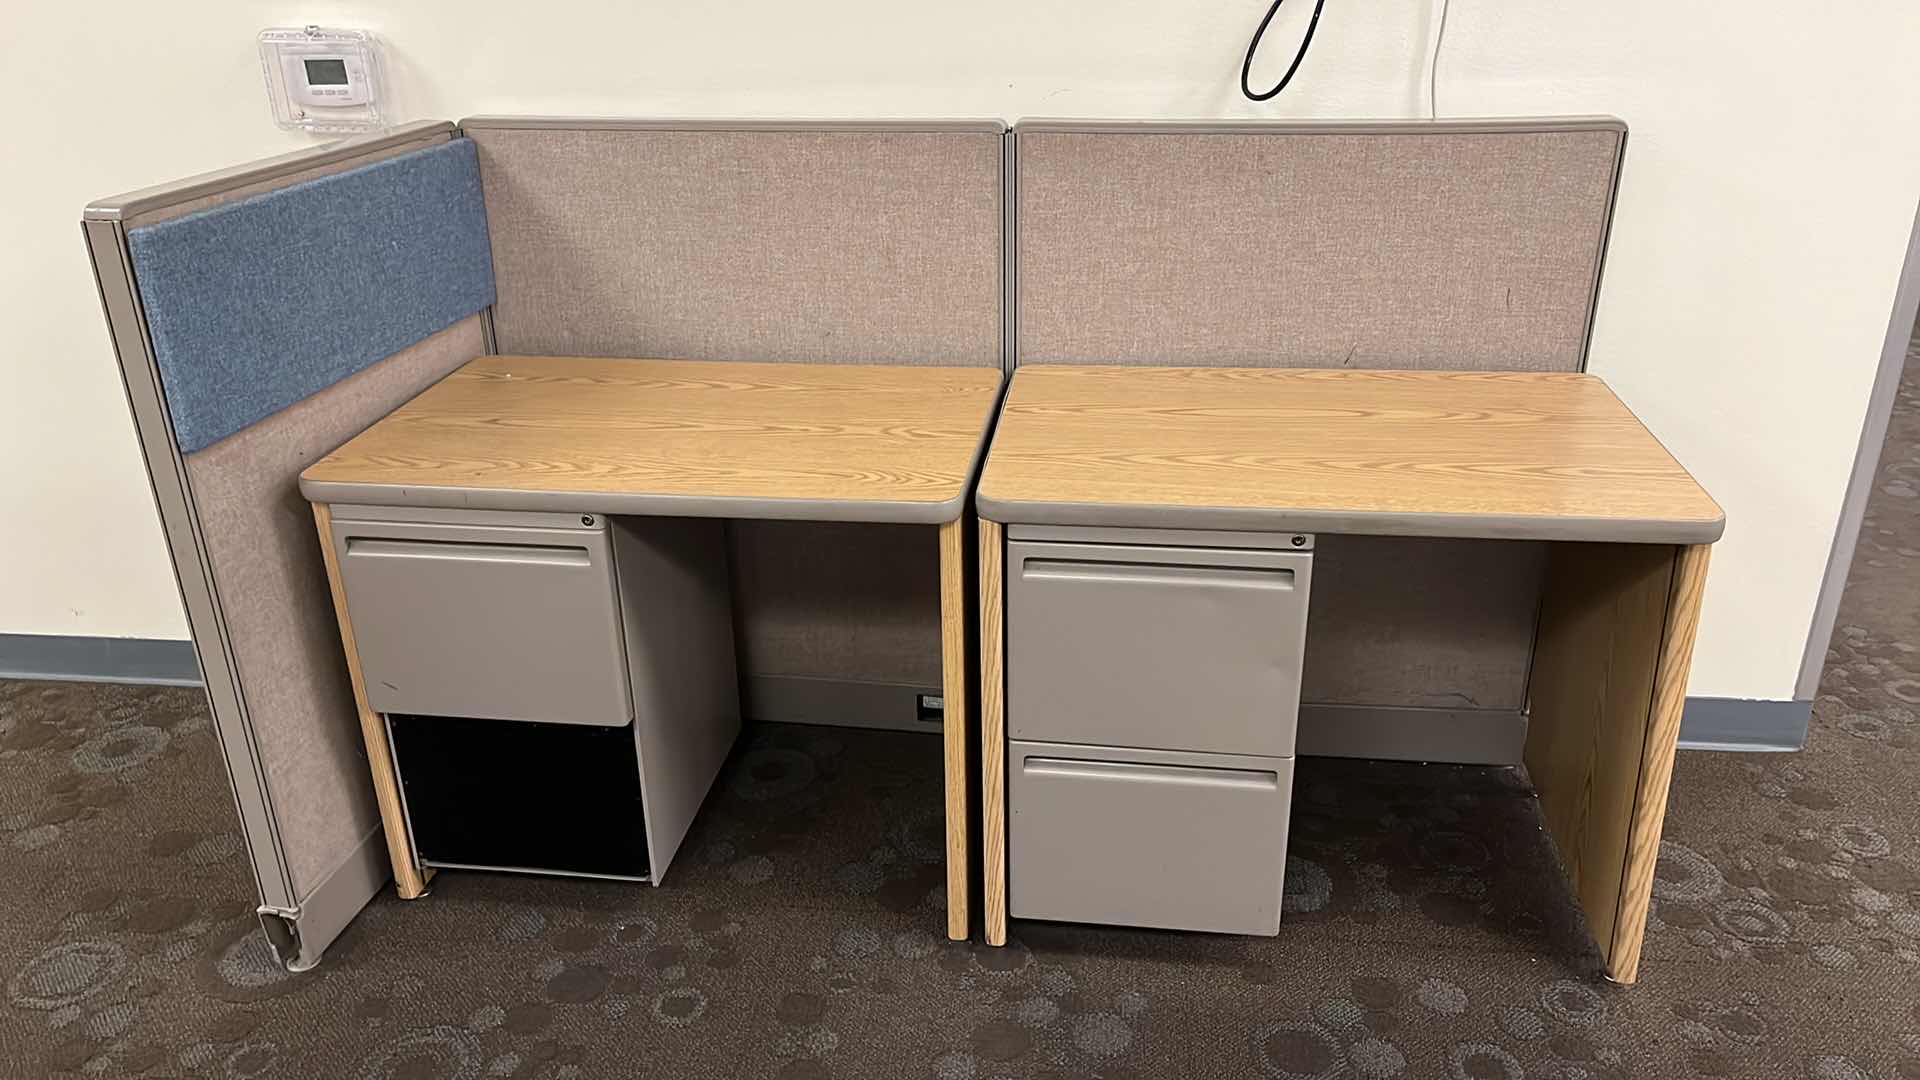 Photo 1 of HAWORTH BUILT IN CUBICLE OFFICE DESKS (2) W CUBICLE PANELS 
(OVERALL DIMENSIONS 77” X 32” H44.5”) READ NOTES